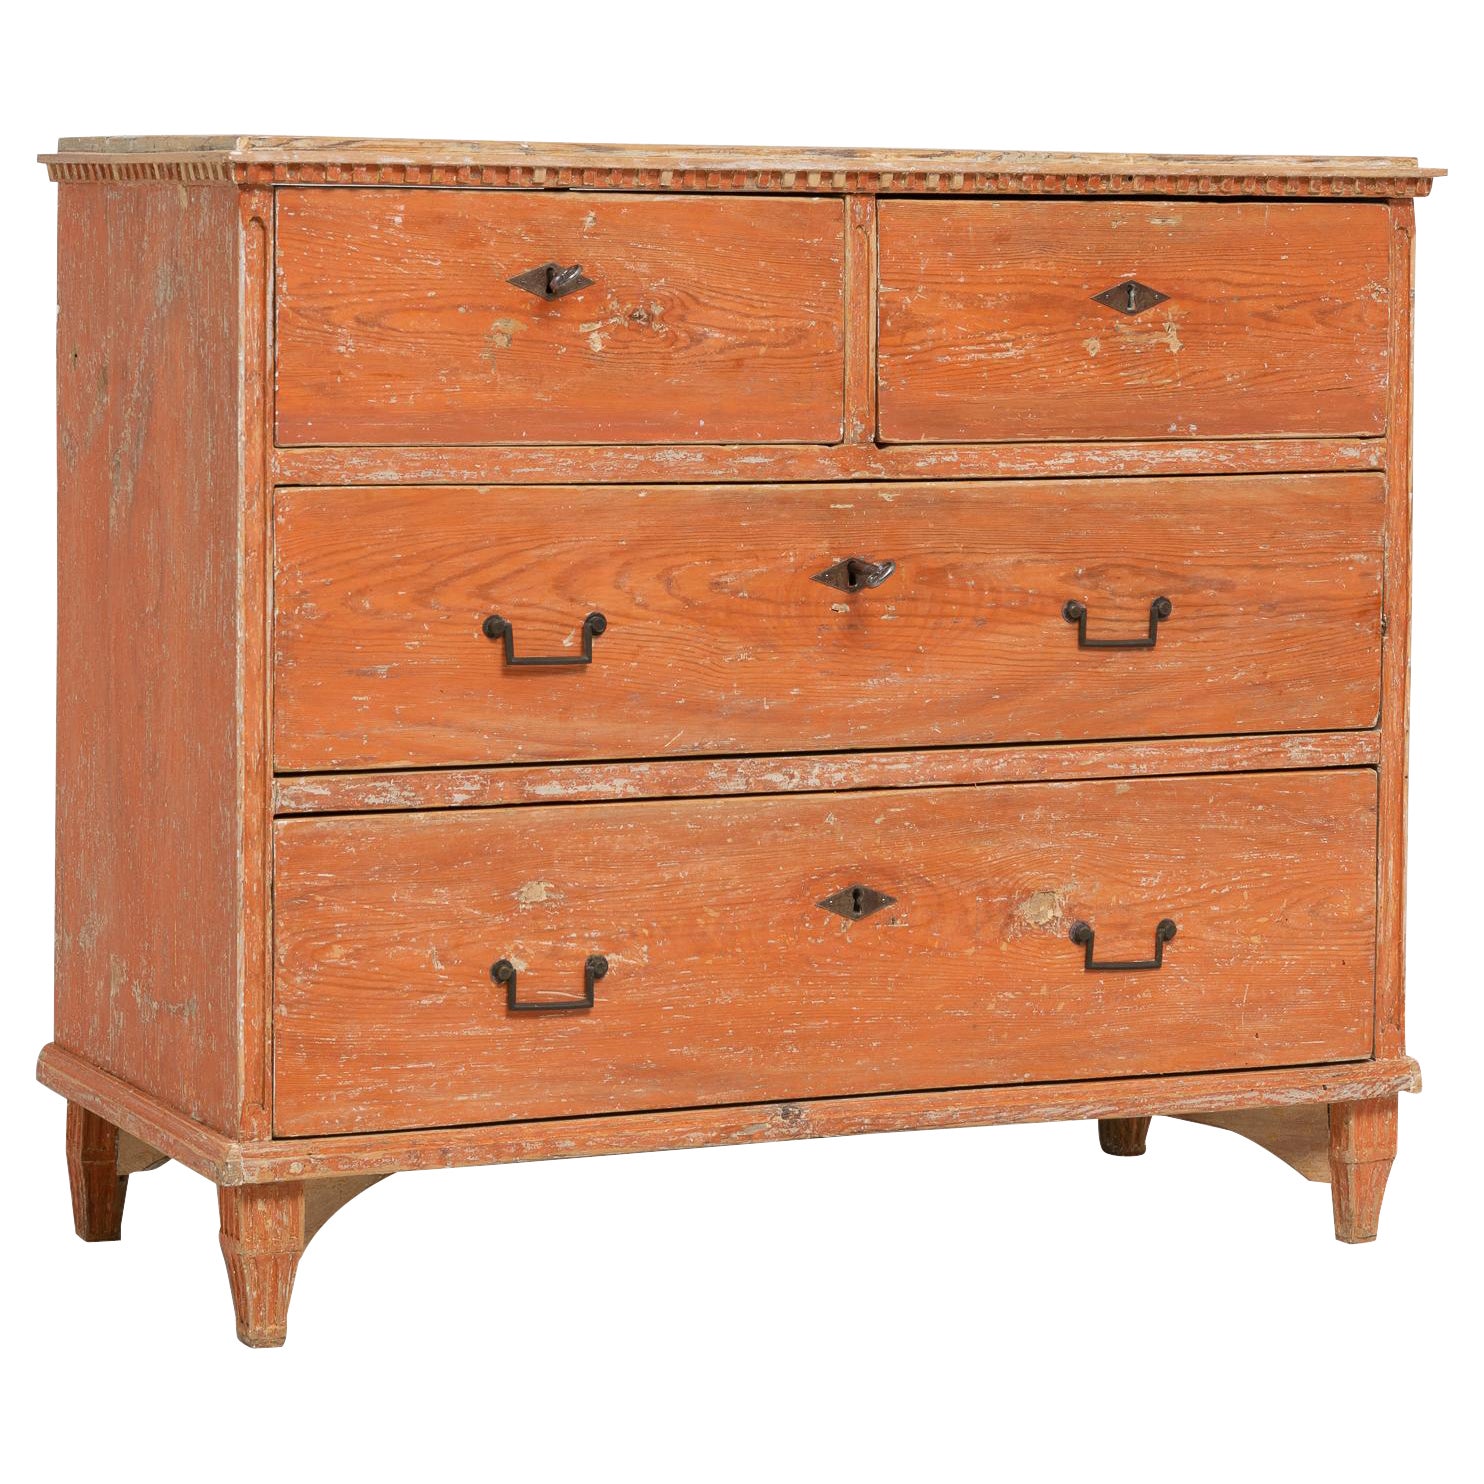 Late 18th Century Swedish Gustavian Neoclassical Chest of Drawers